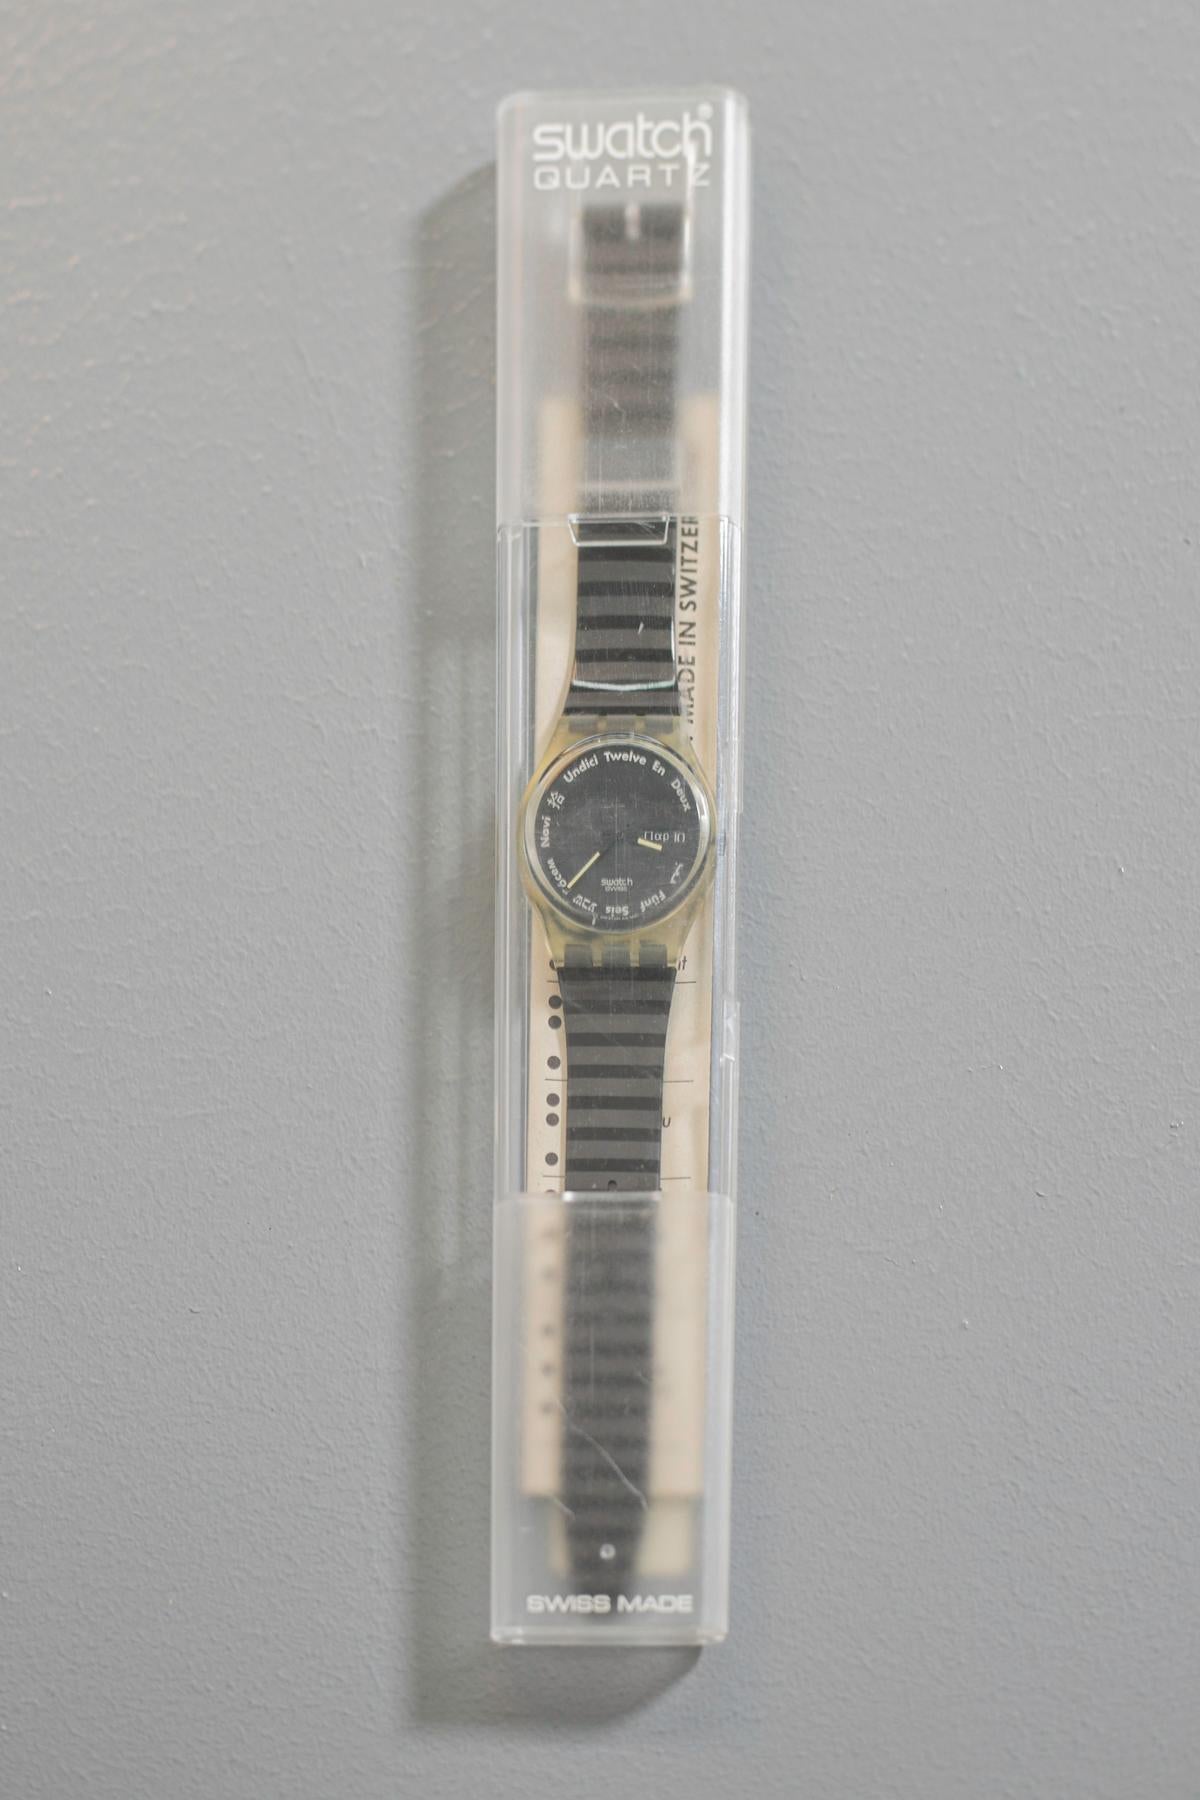 Vintage Swatch watch from the 1992 collection. This is a very classic and elegant watch, the colors of the strap allow this piece to be combined with both an elegant day and evening outfit. Inside the dial there are numbers written in various